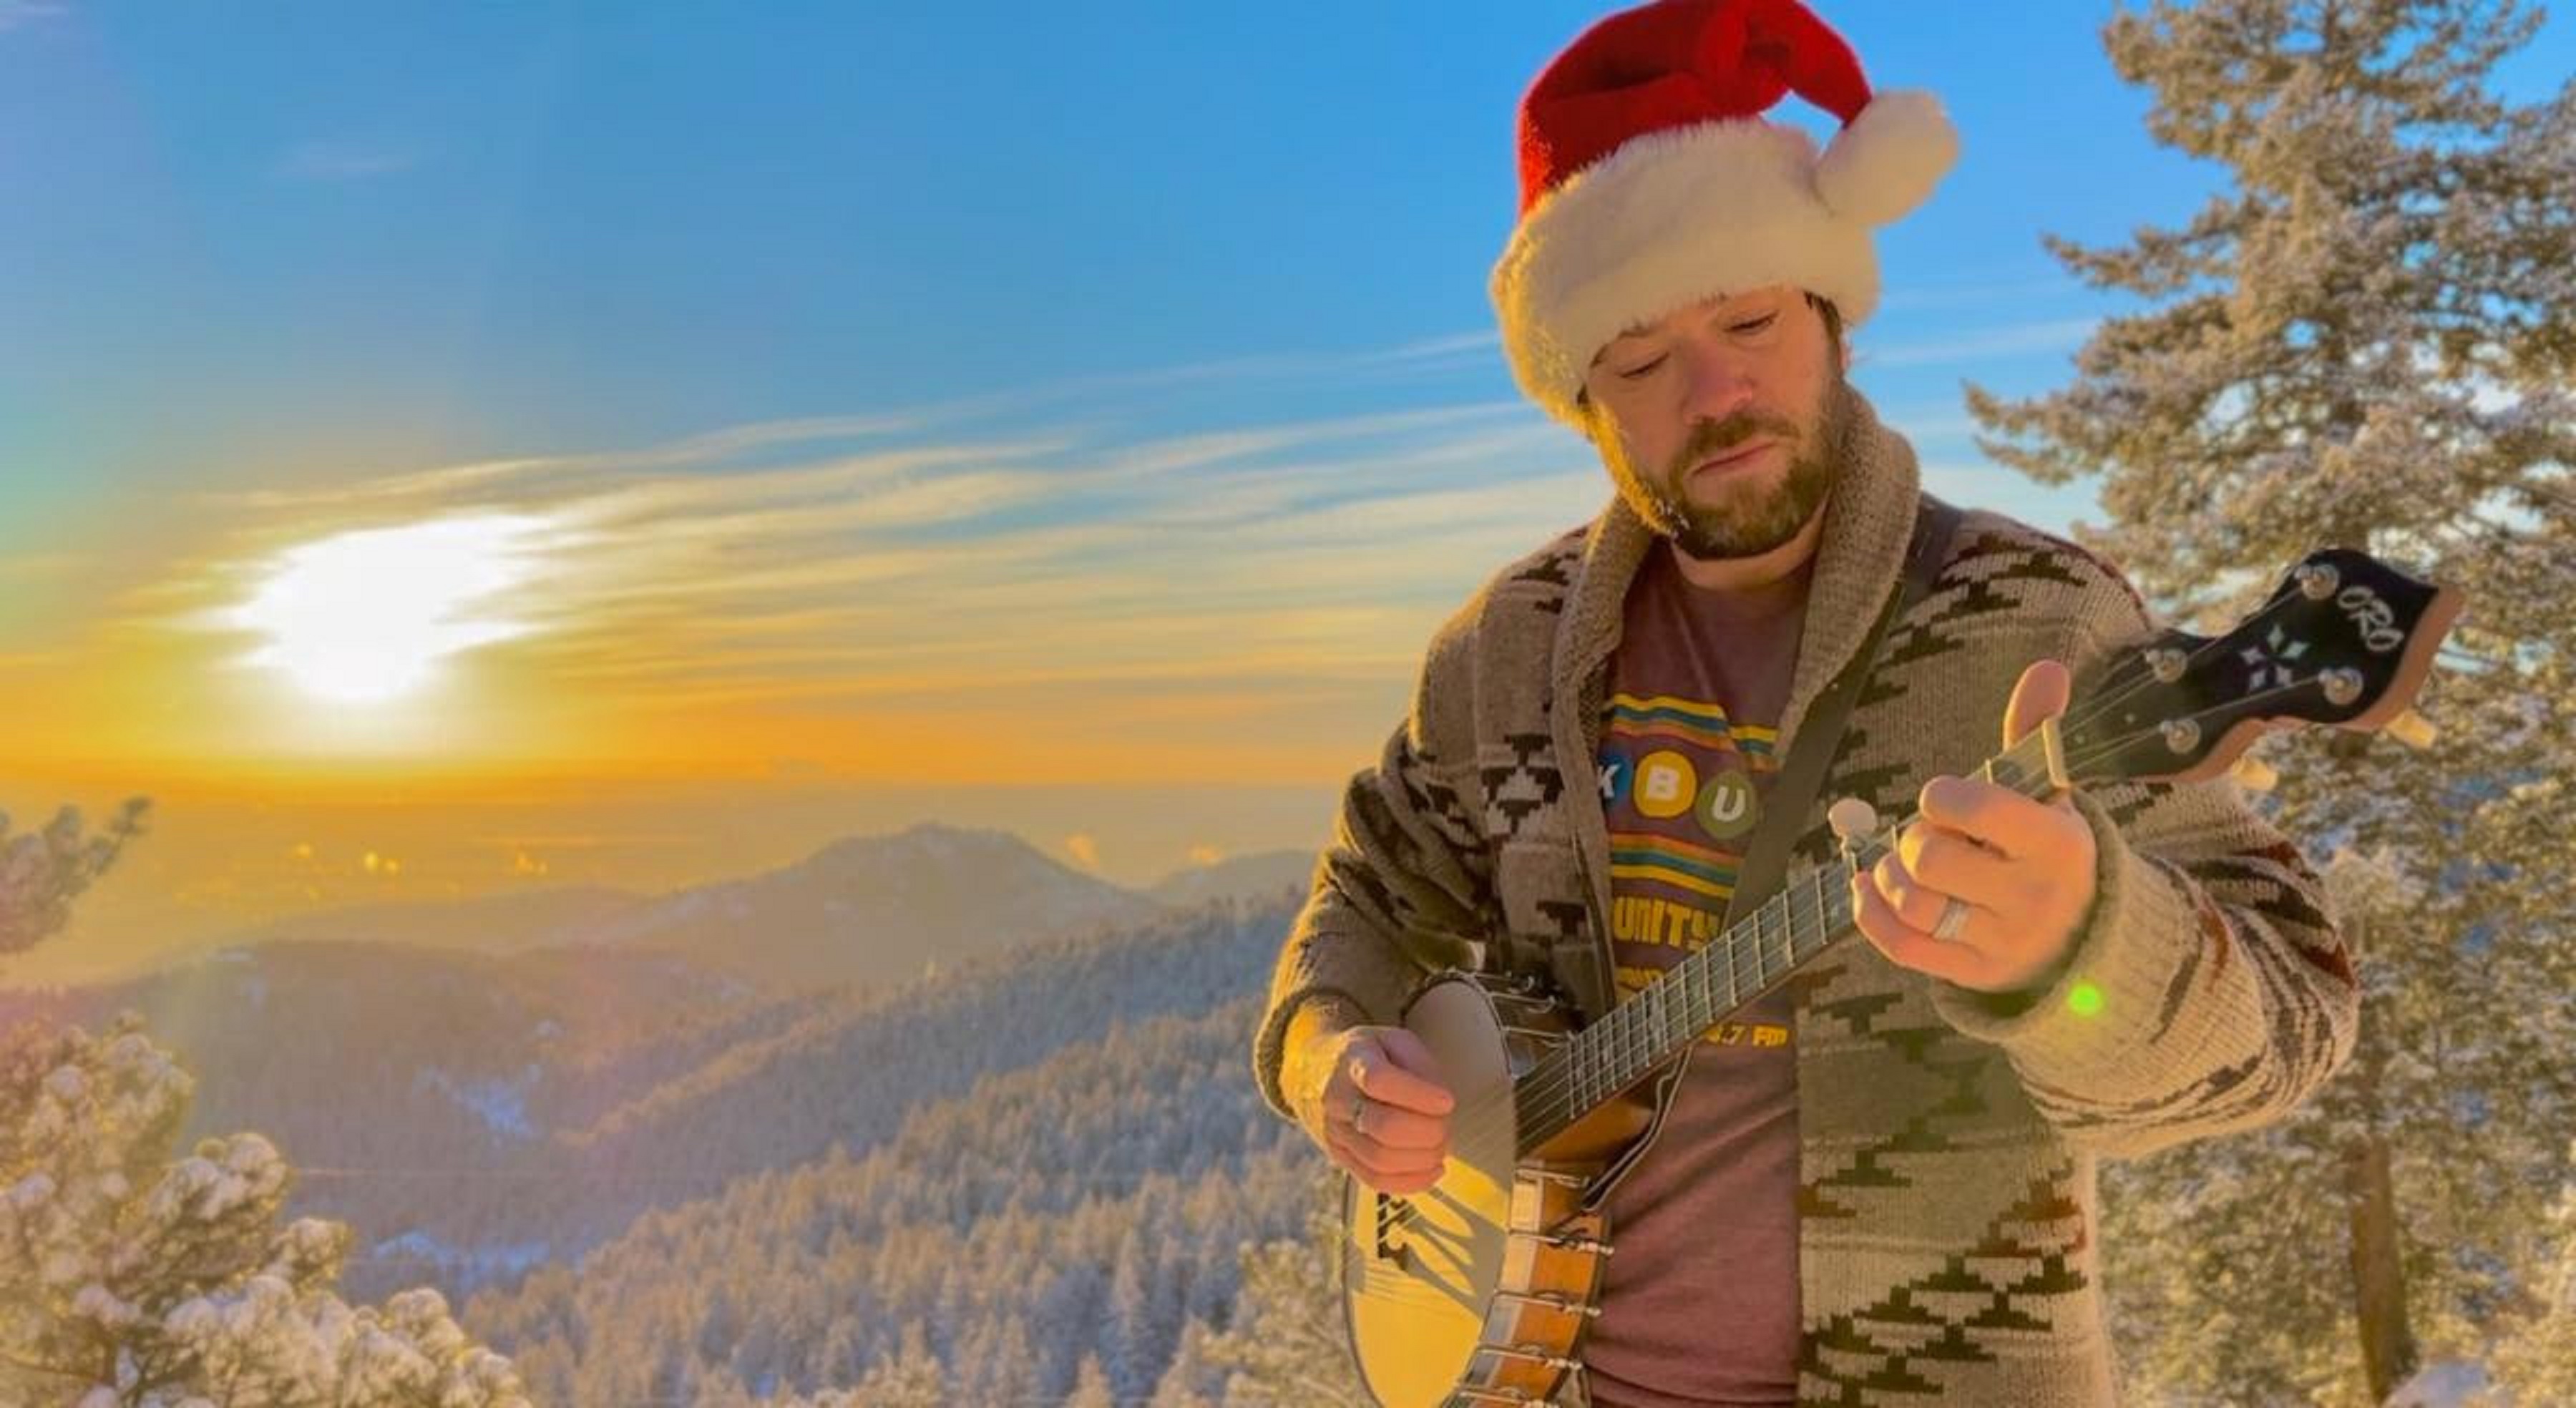 Wild fox playing Andy Thorn shares stunning Christmas album 'High Country Holiday'